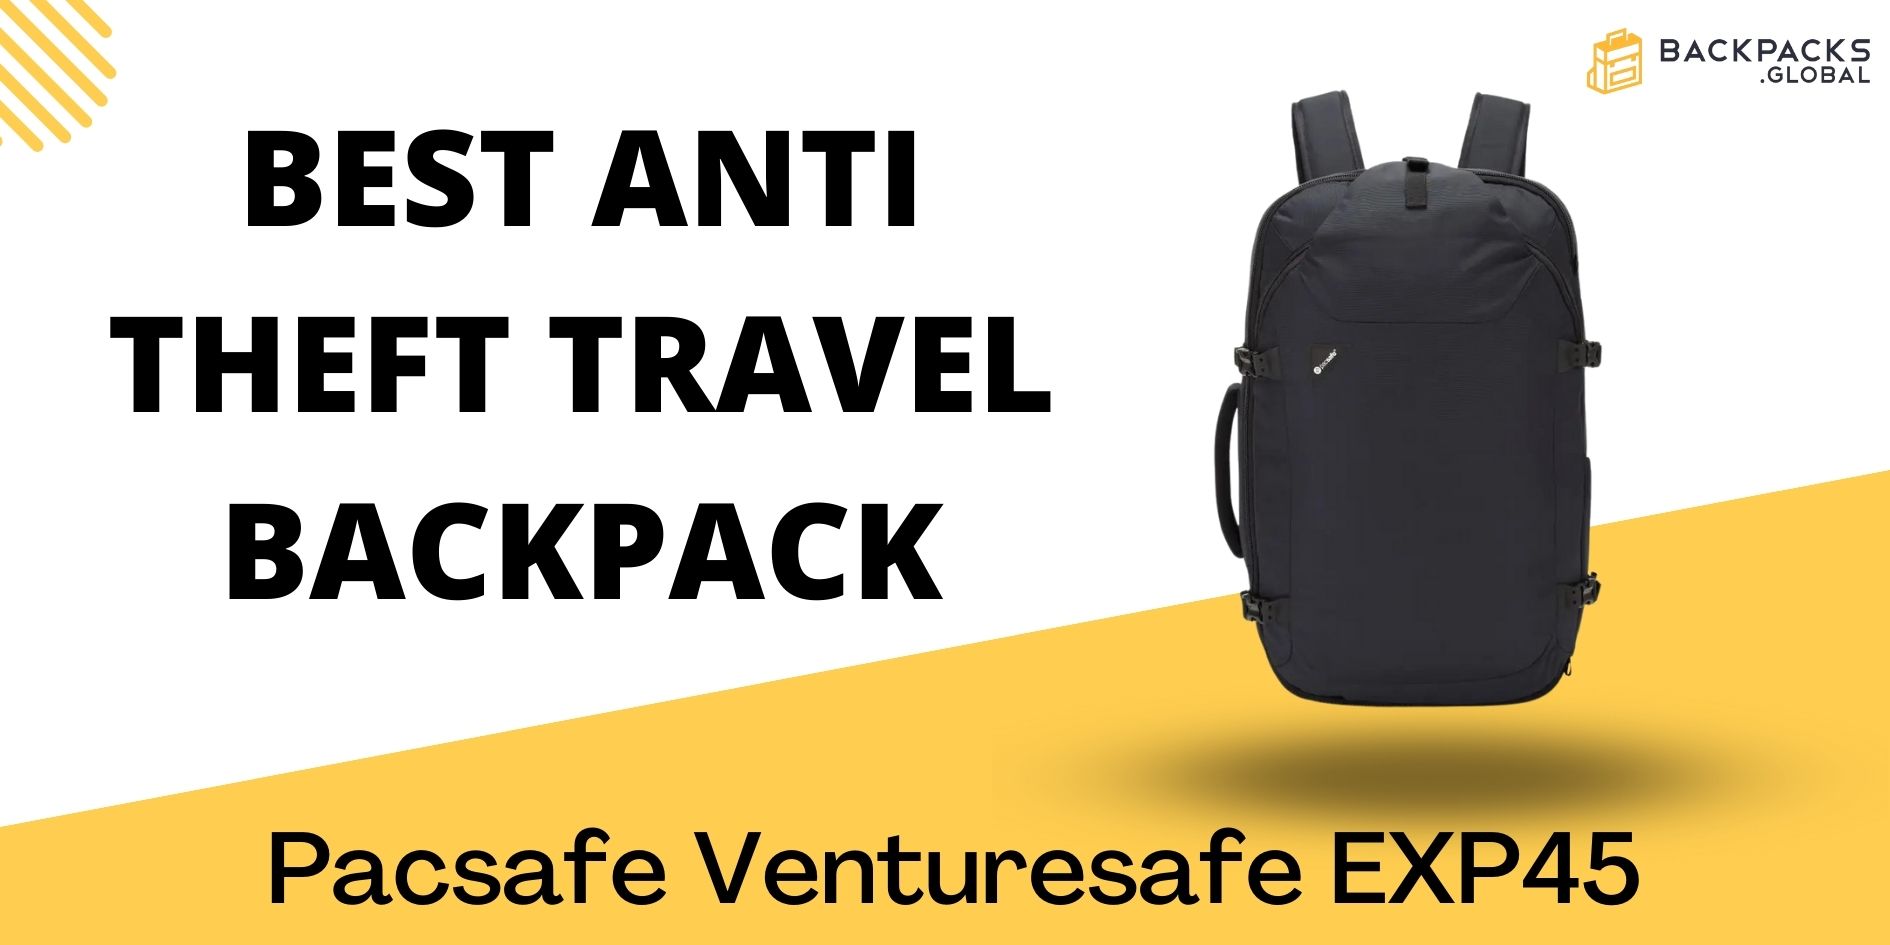 What Is the Best Anti Theft Backpack? - Backpacks Global